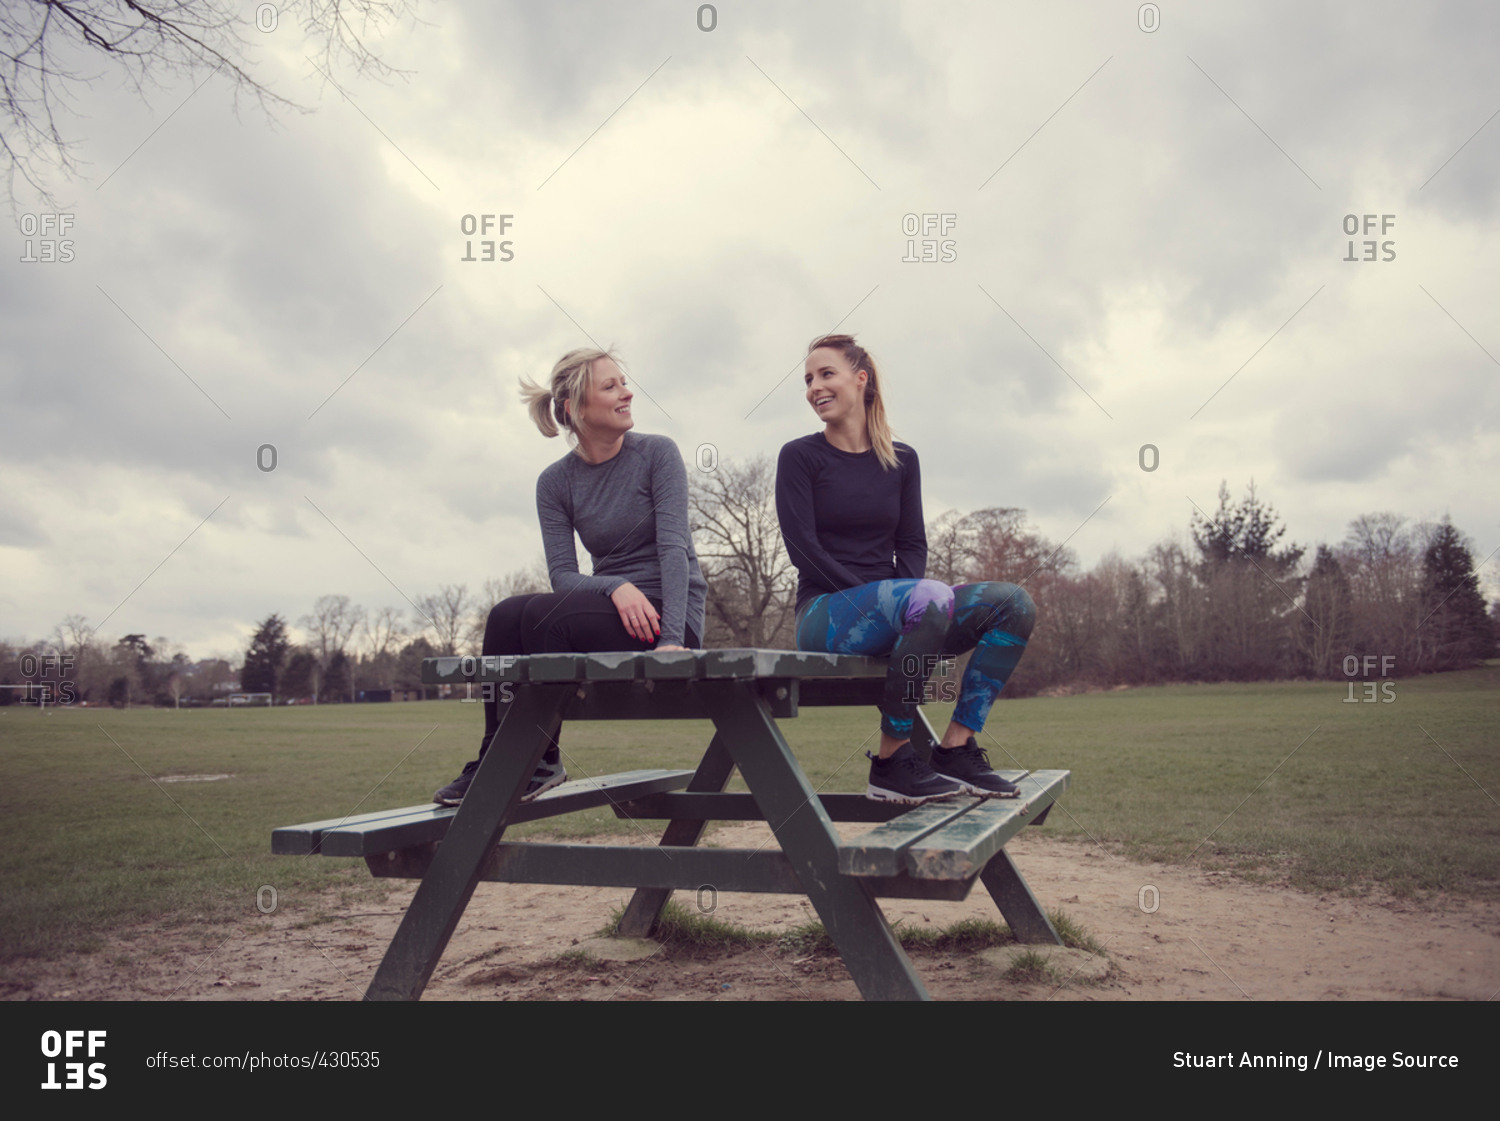 Women wearing sports clothing sitting on picnic table chatting